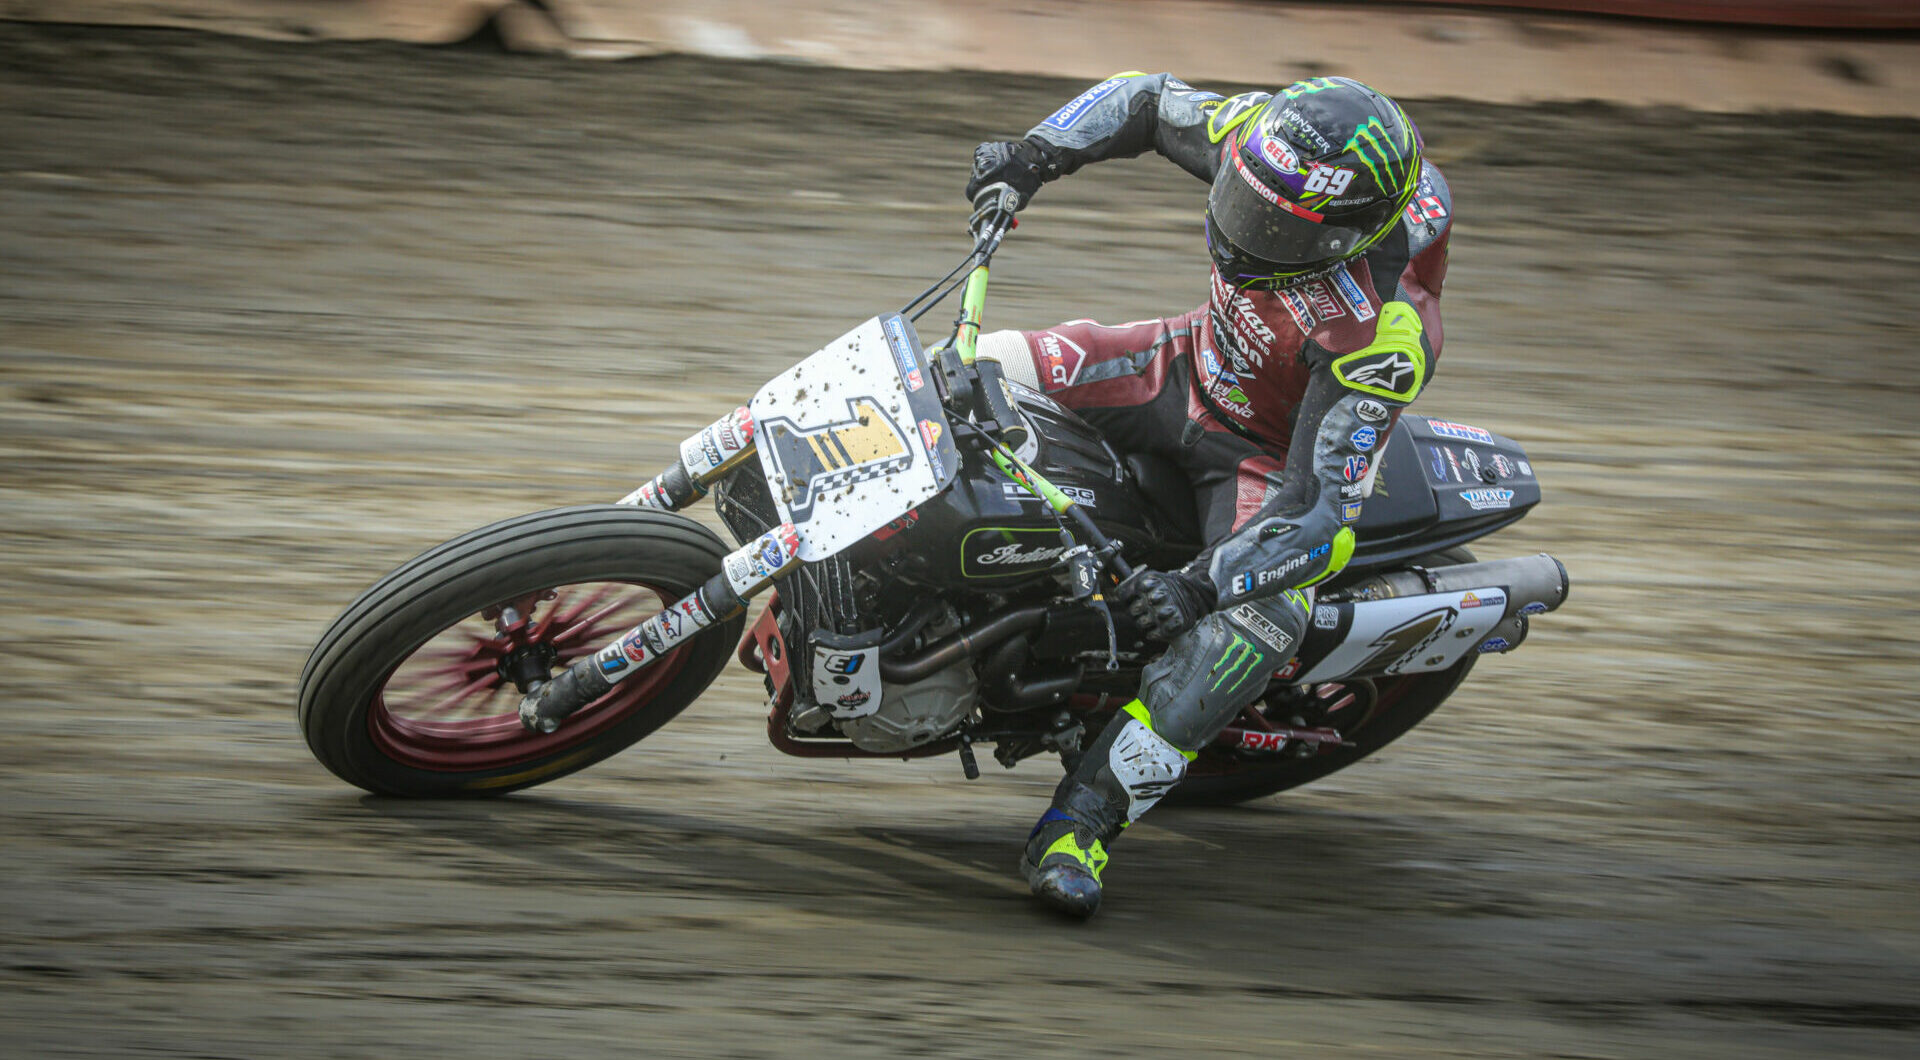 Jared Mees (1), as seen at the Bridgeport Half-Mile. Photo by Scott Hunter, courtesy AFT.